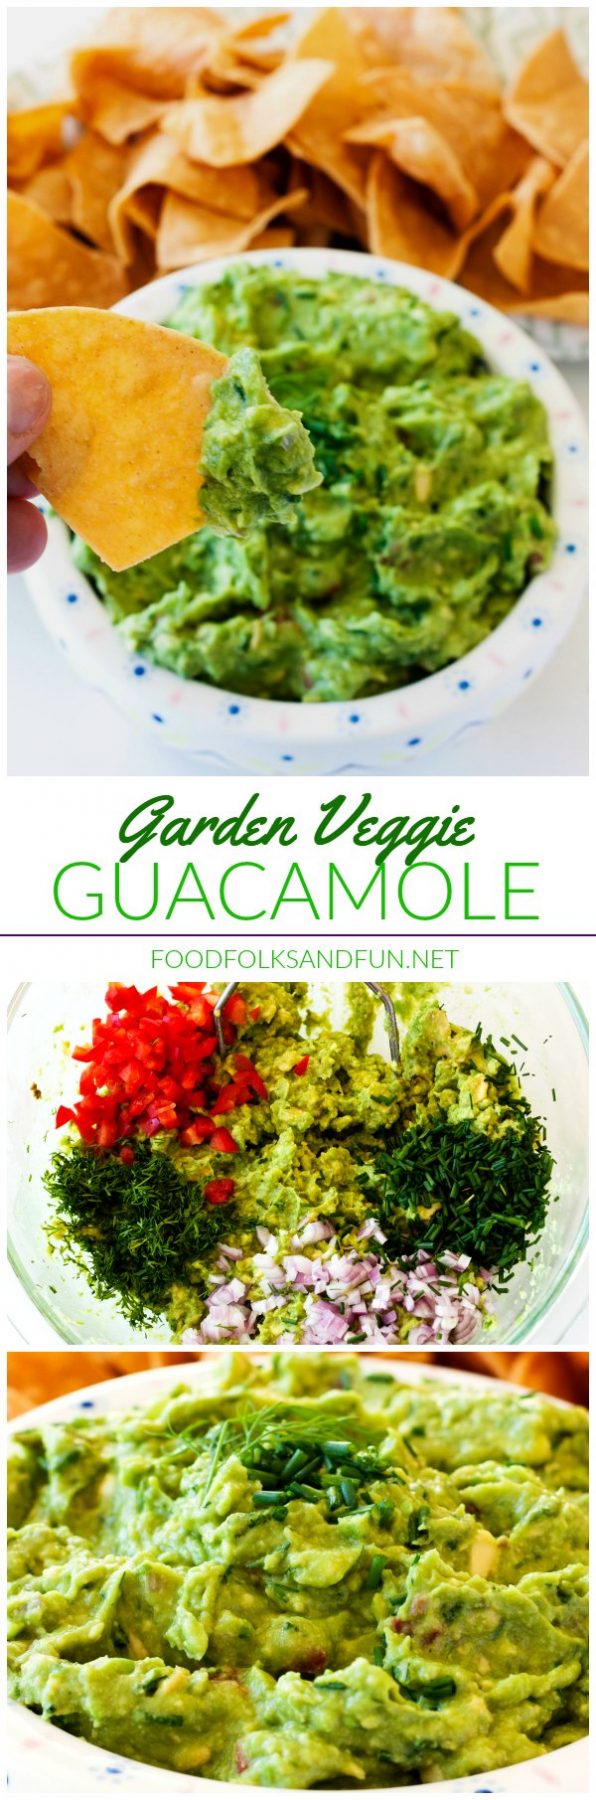 A collage of Garden Veggie Guacamole with text overlay for Pinterest